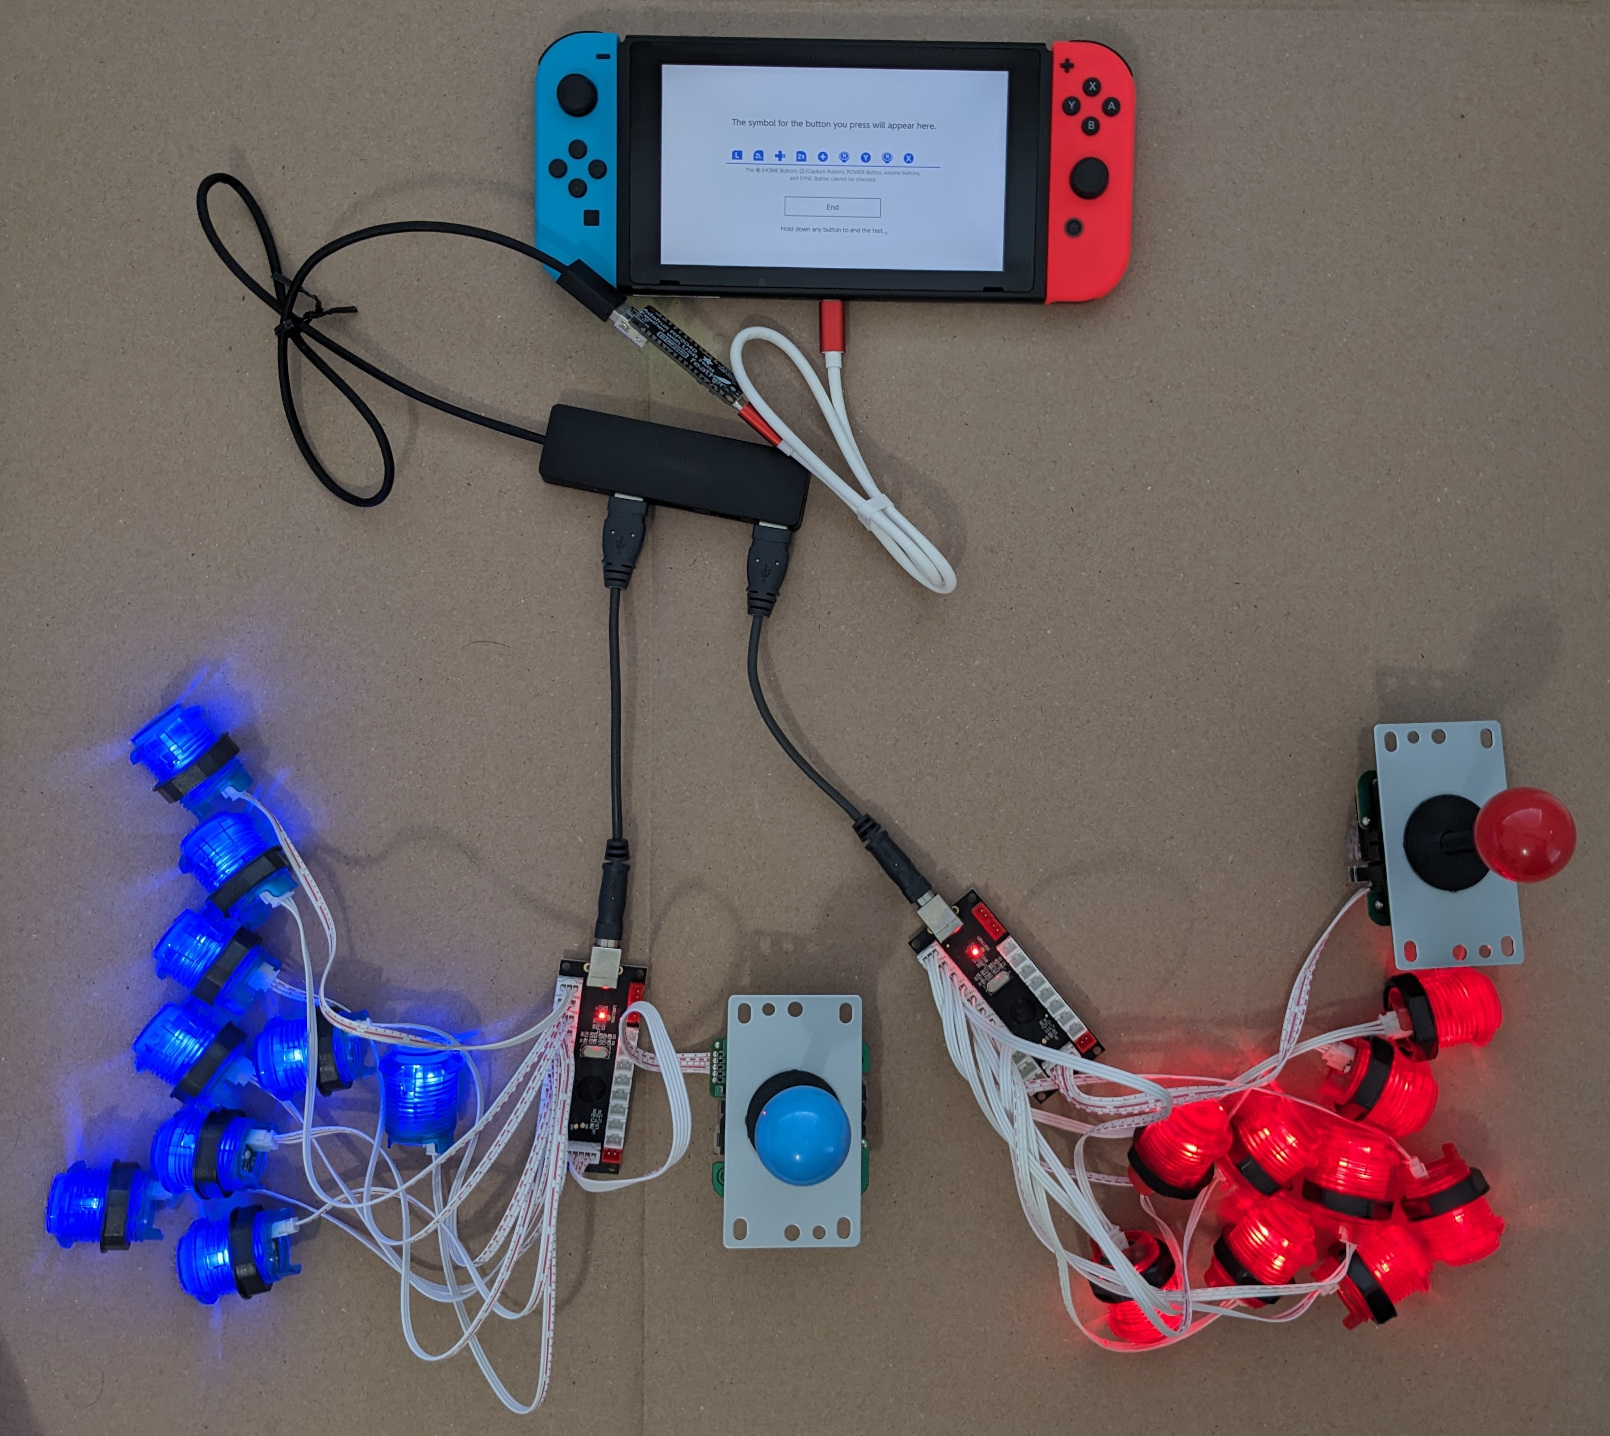 Nintendo Switch connected to 2 joysticks and 18 arcade buttons